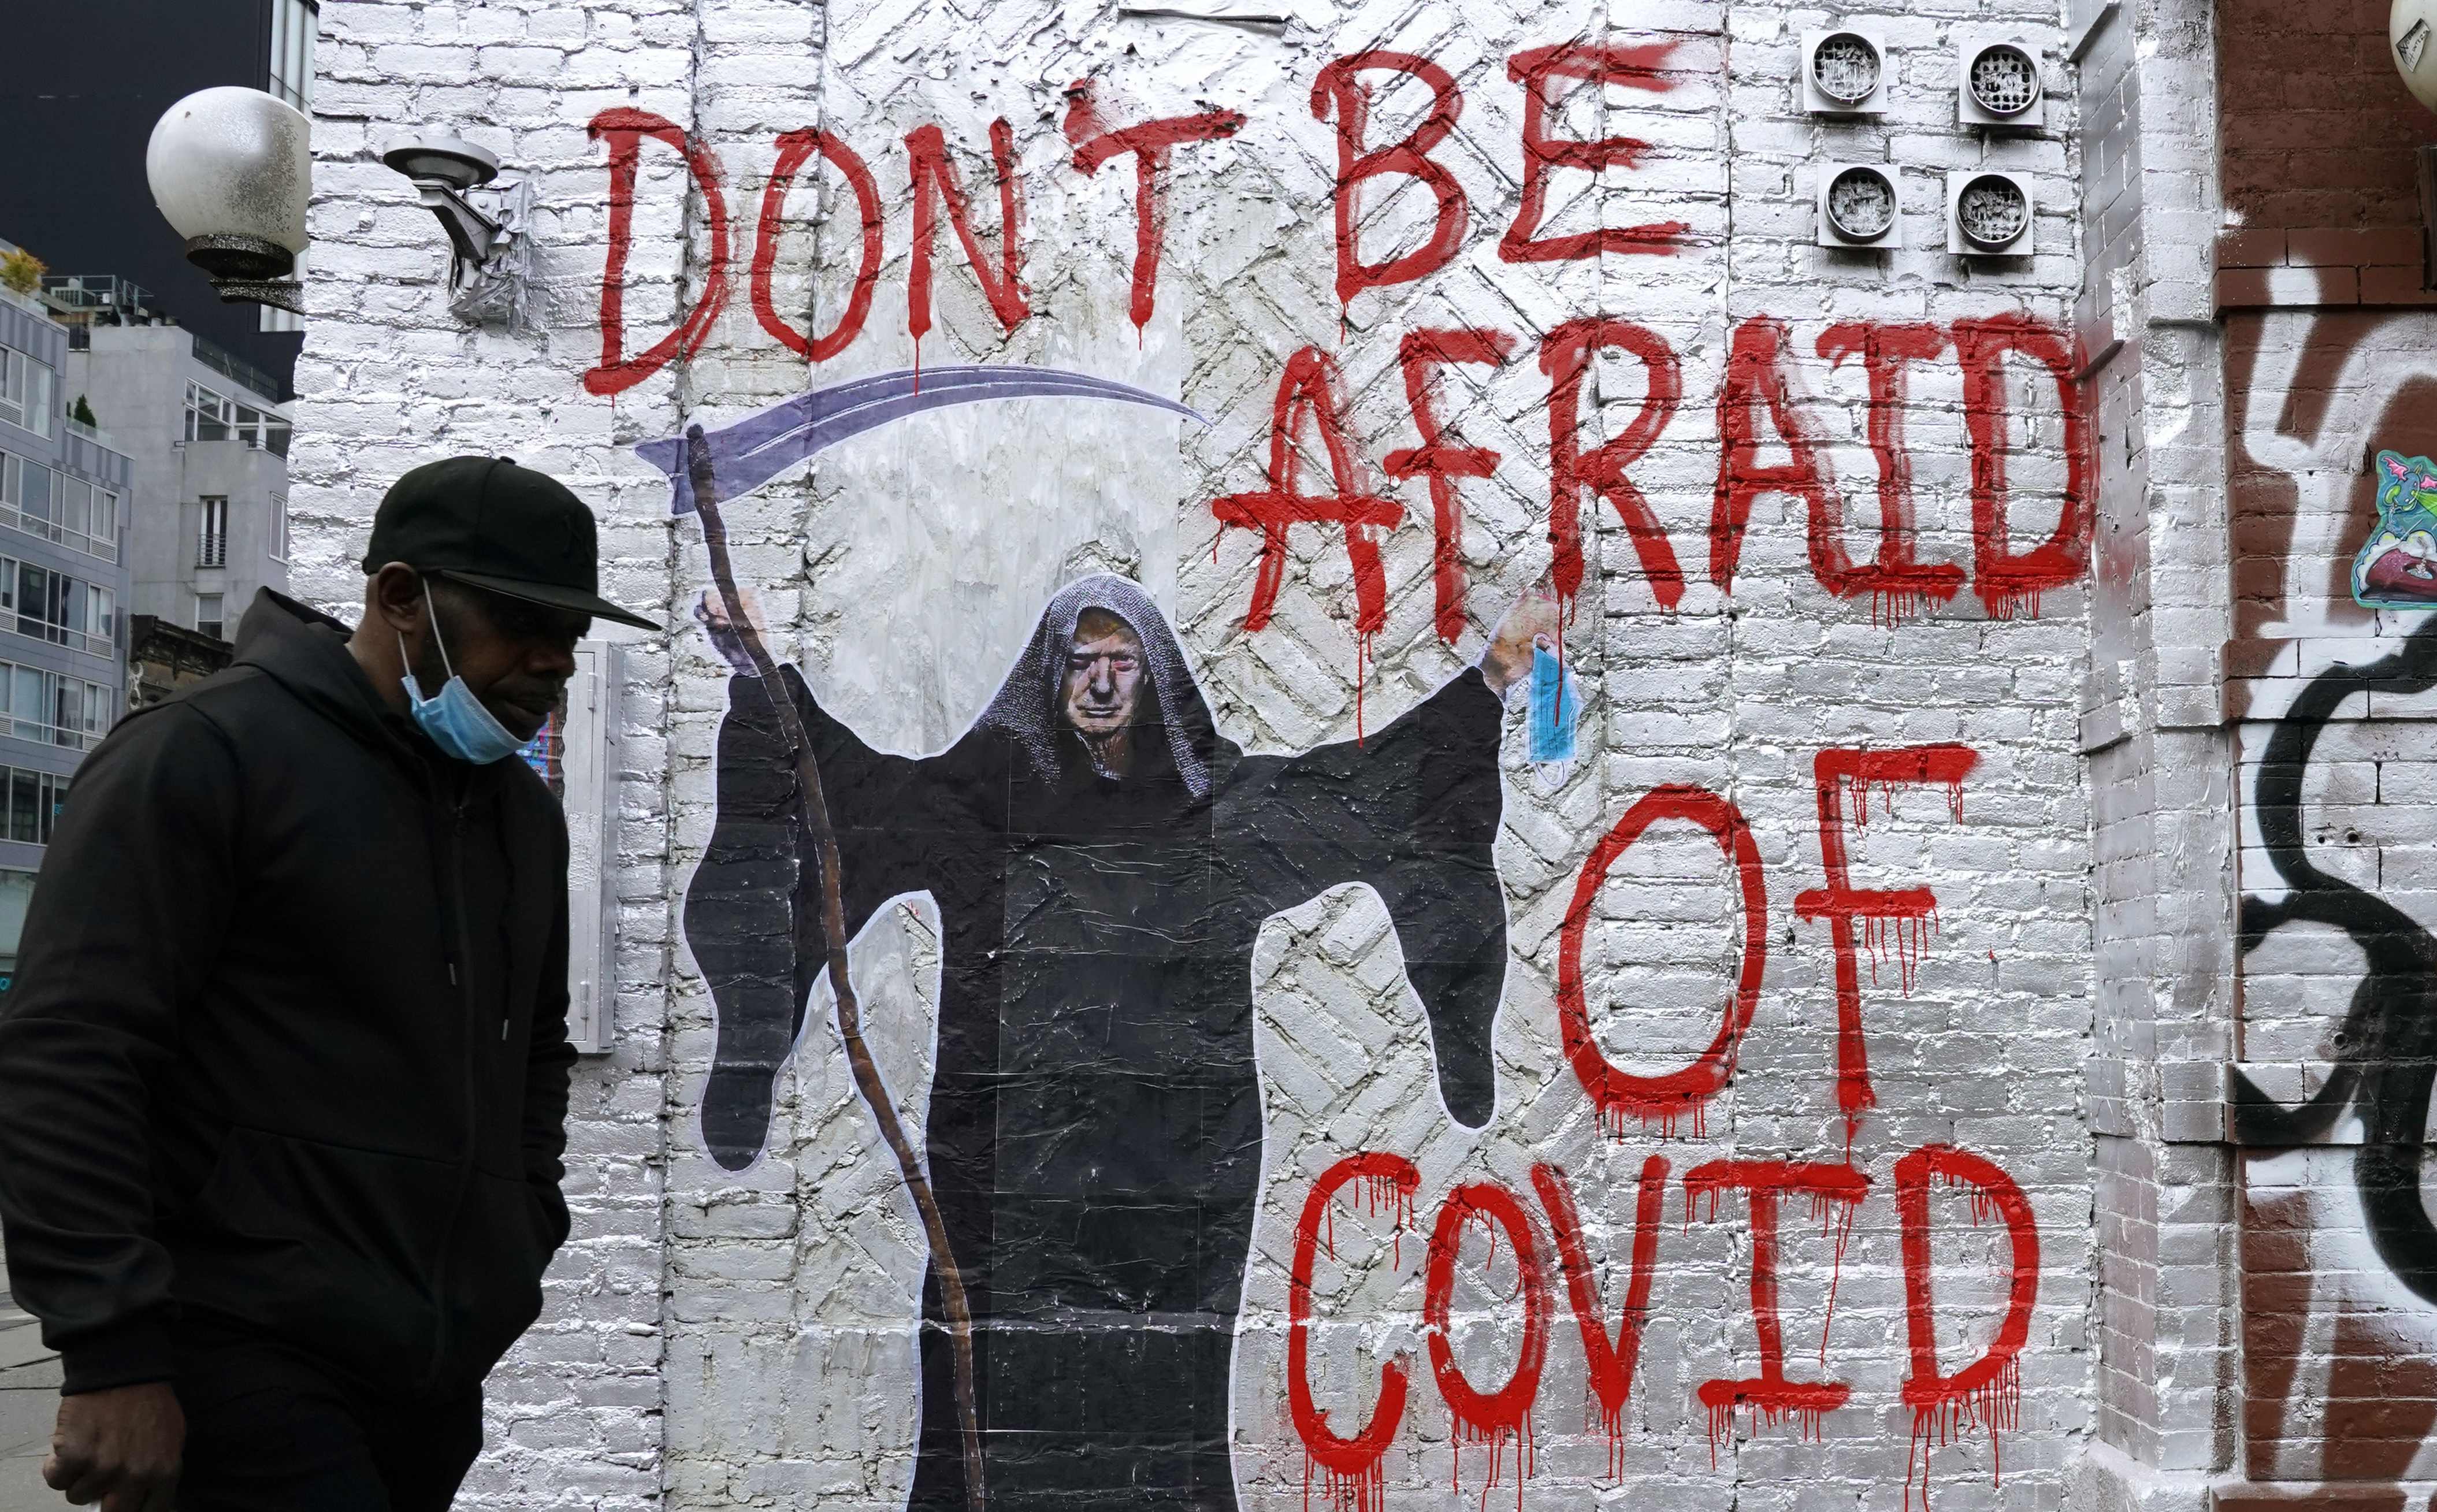 A man walks past a mural by the artist who goes by the name "Pure Genius" depticting US President Donald Trump as the Grim Reaper on a wall on Houston Street in New York City